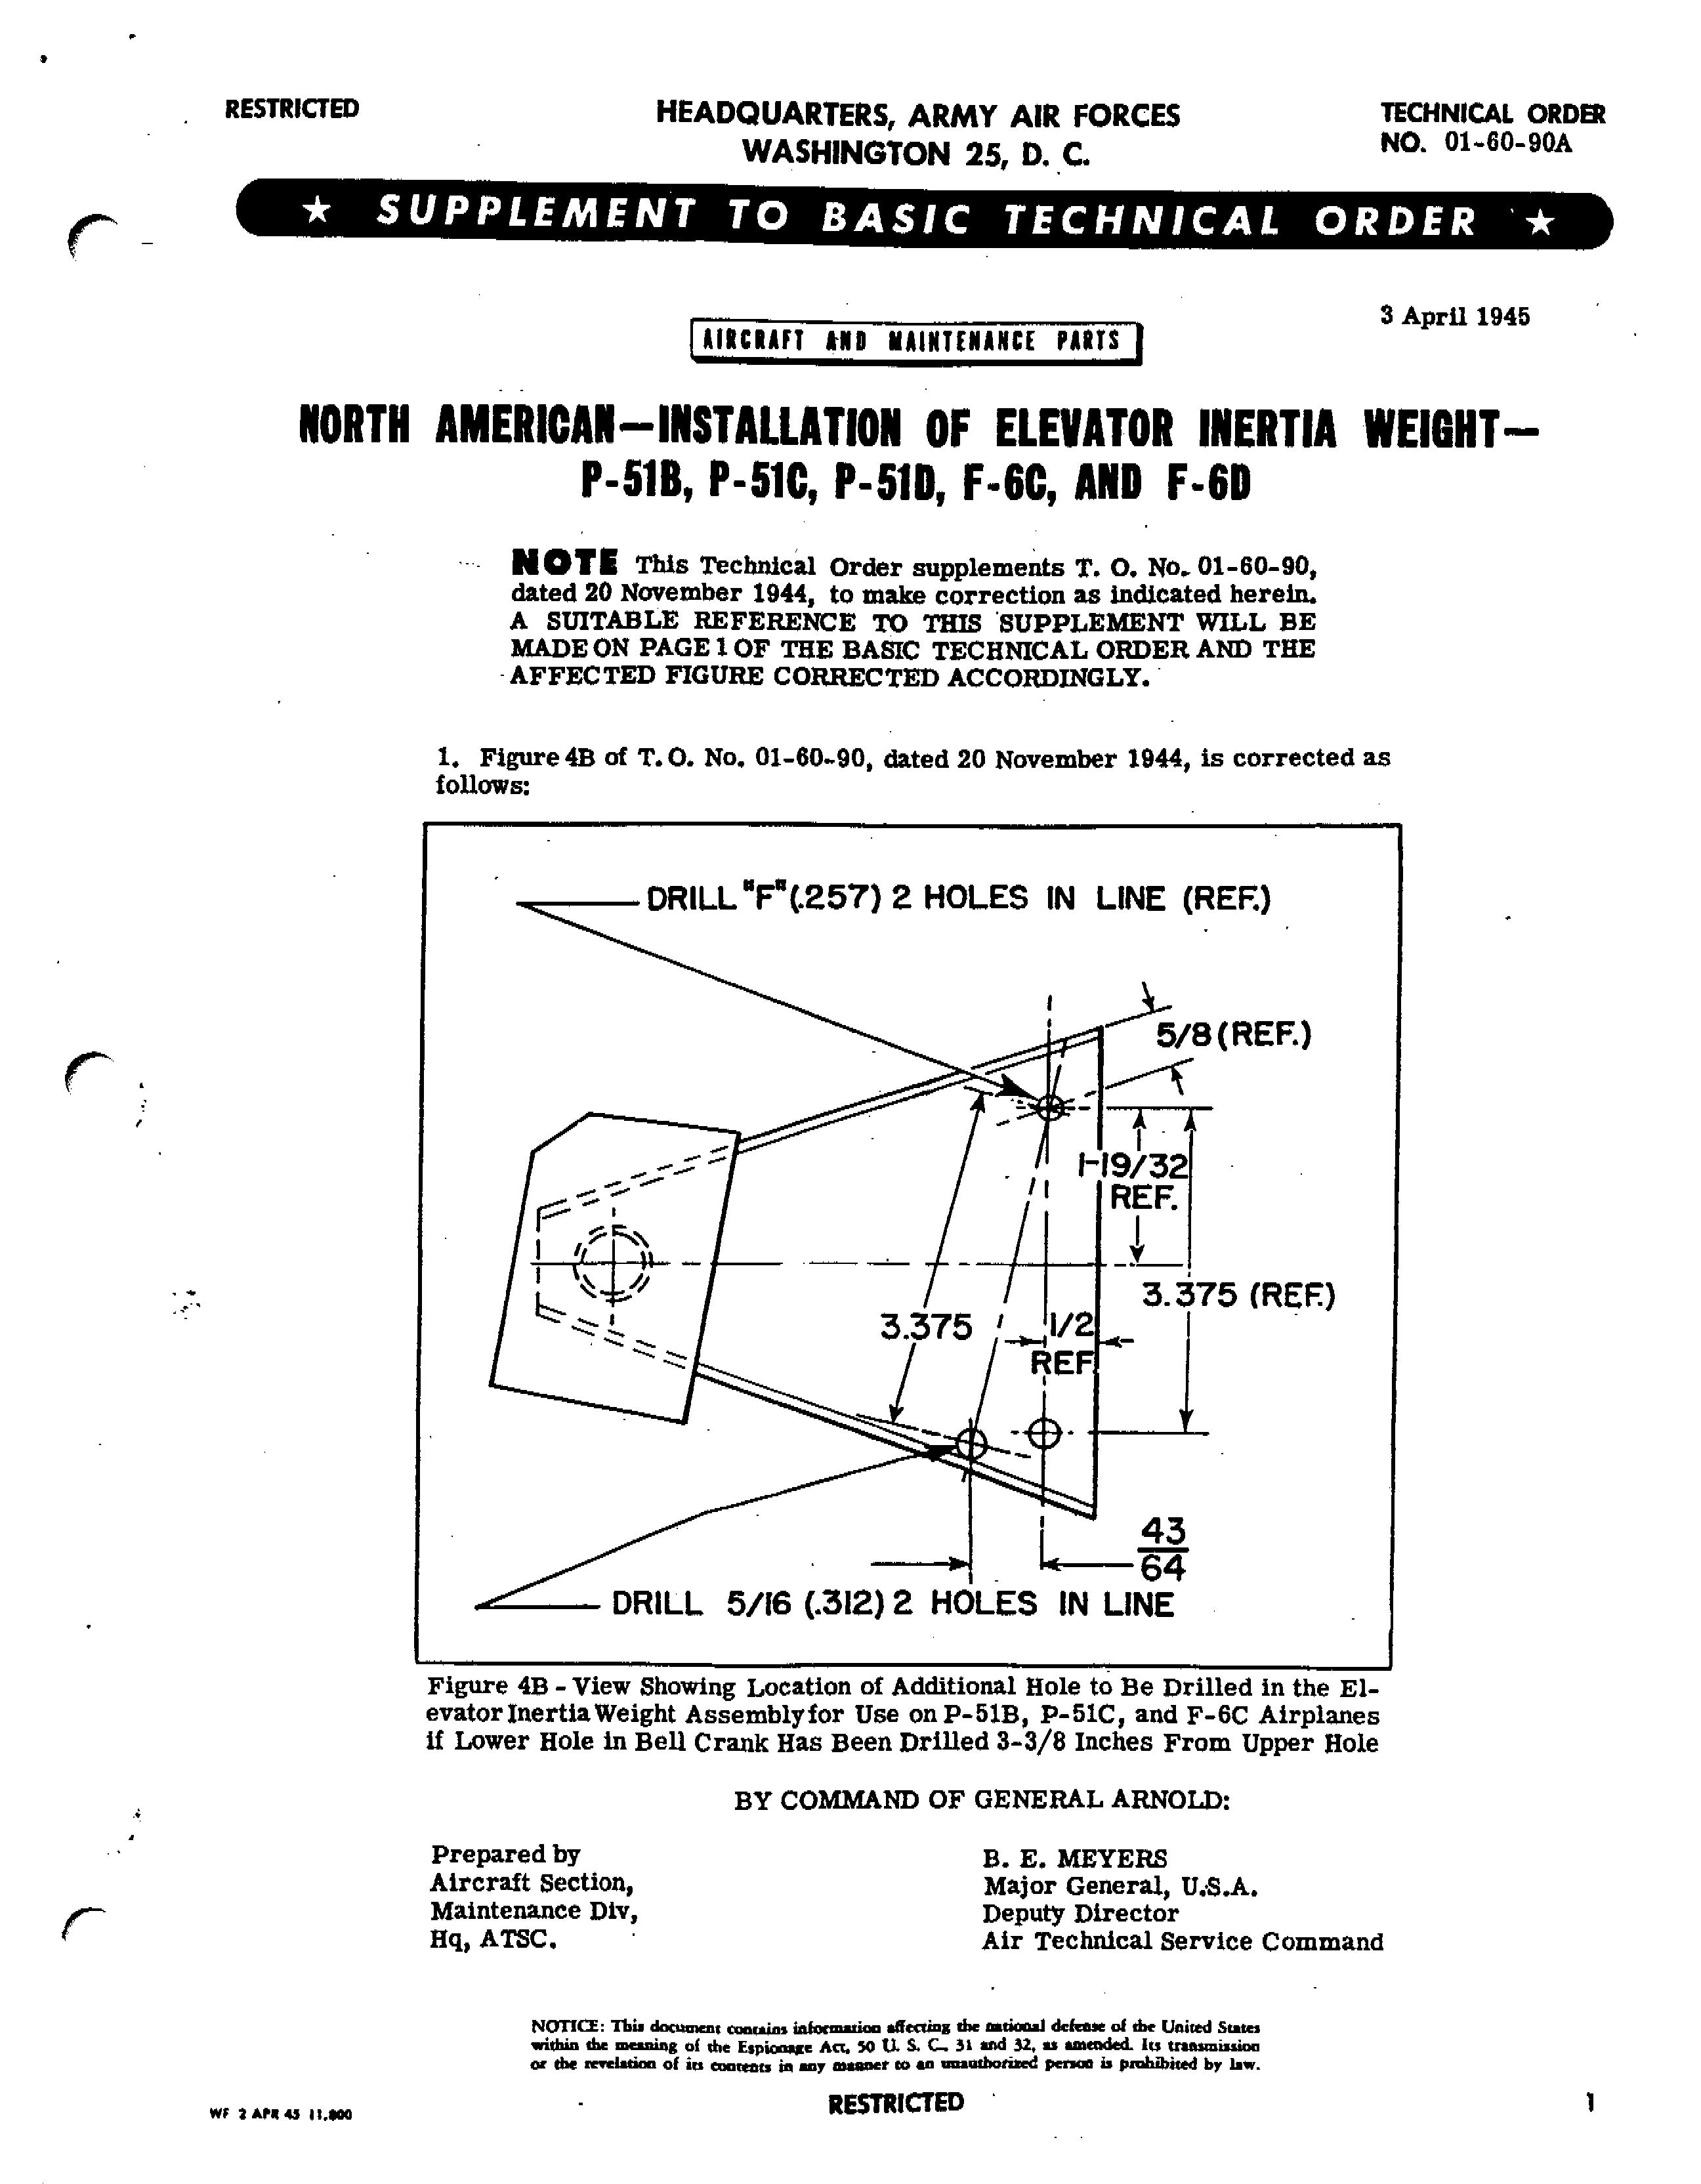 Sample page 1 from AirCorps Library document: Installation of Elevator Inertia Weight for P-51B, C, D, and F-6C and D